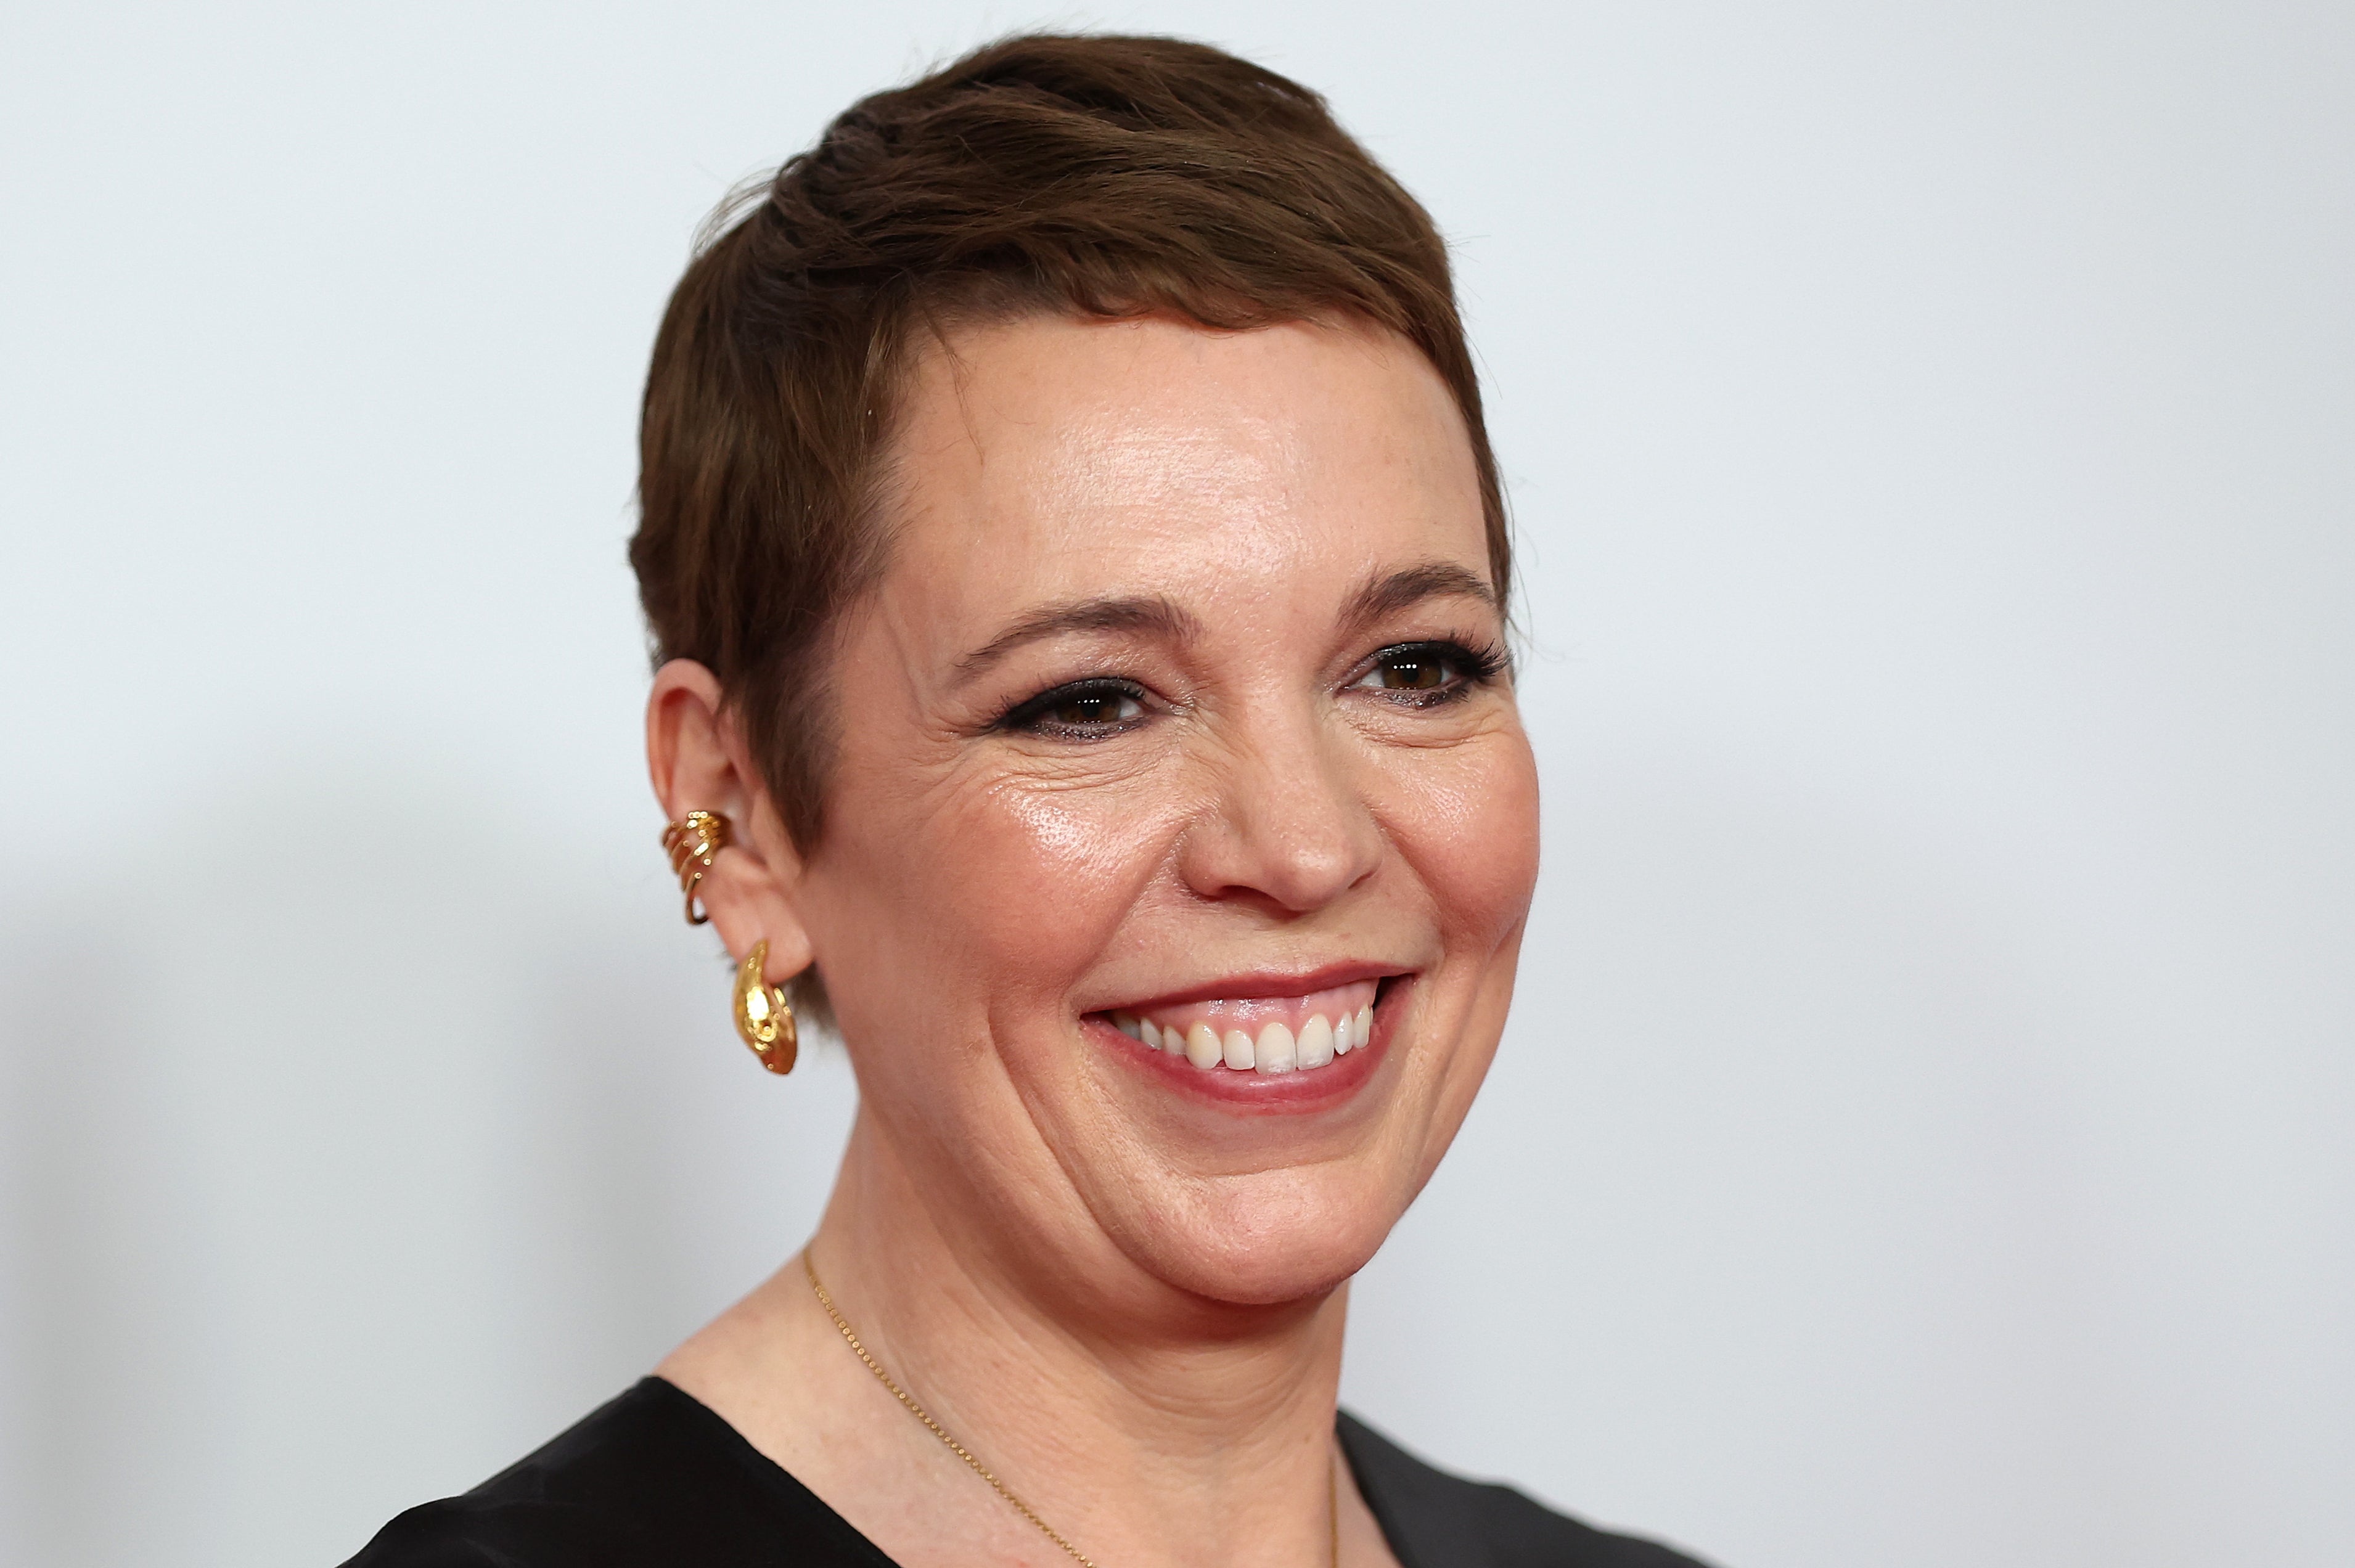 Olivia Colman has spoken about the Hollywood pay gap, insisting that she’d be paid more if she were a man